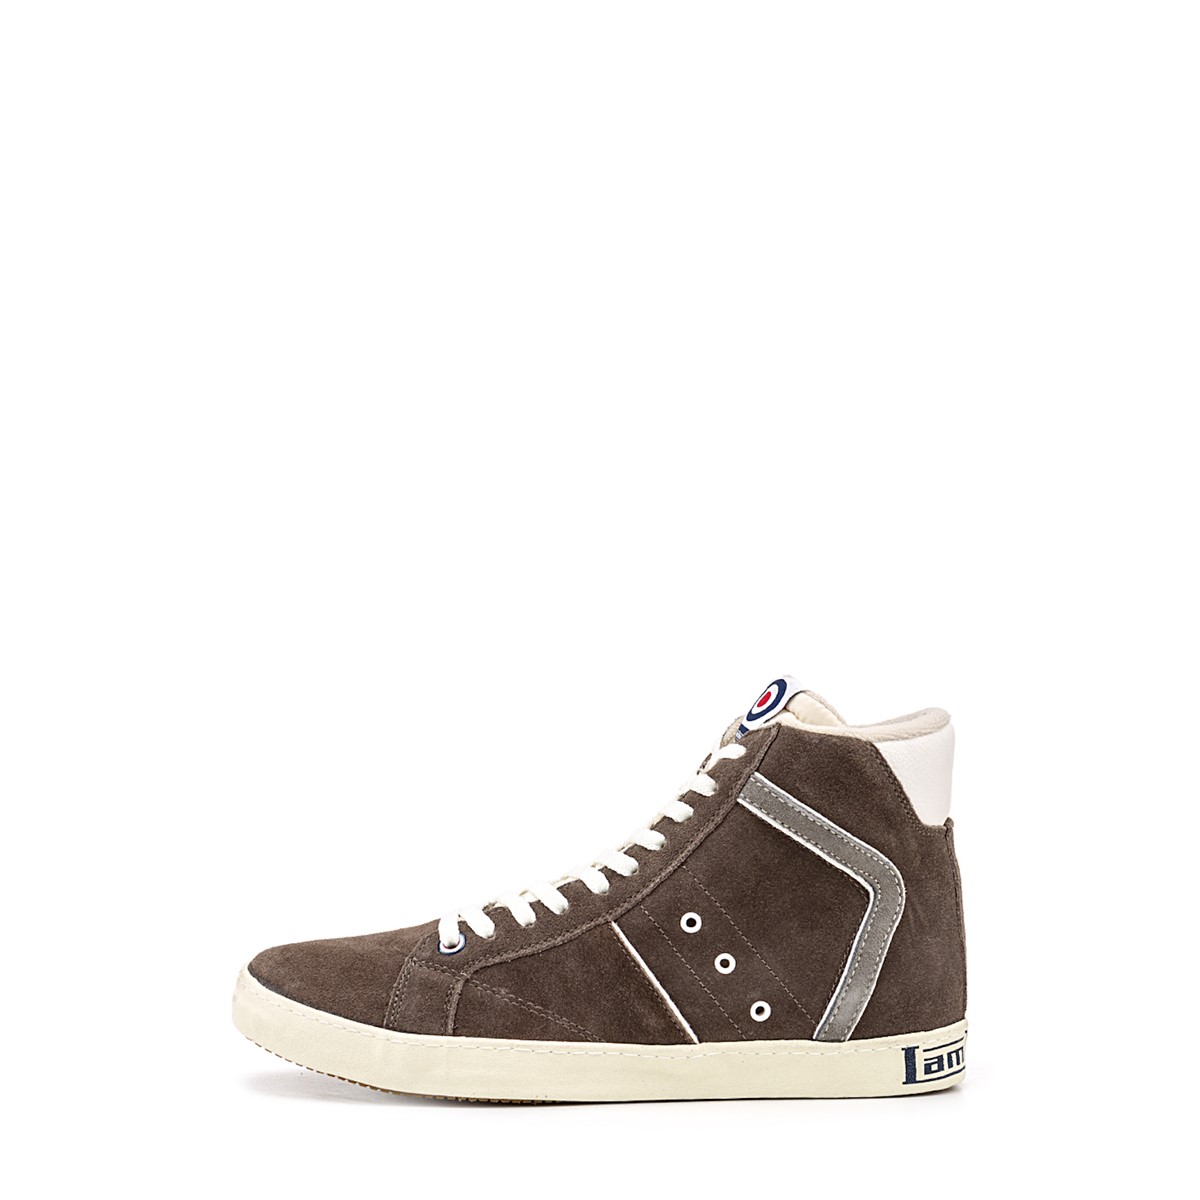 Chaussure Homme Montante Cuir Rugged Mid Bbi Distributions